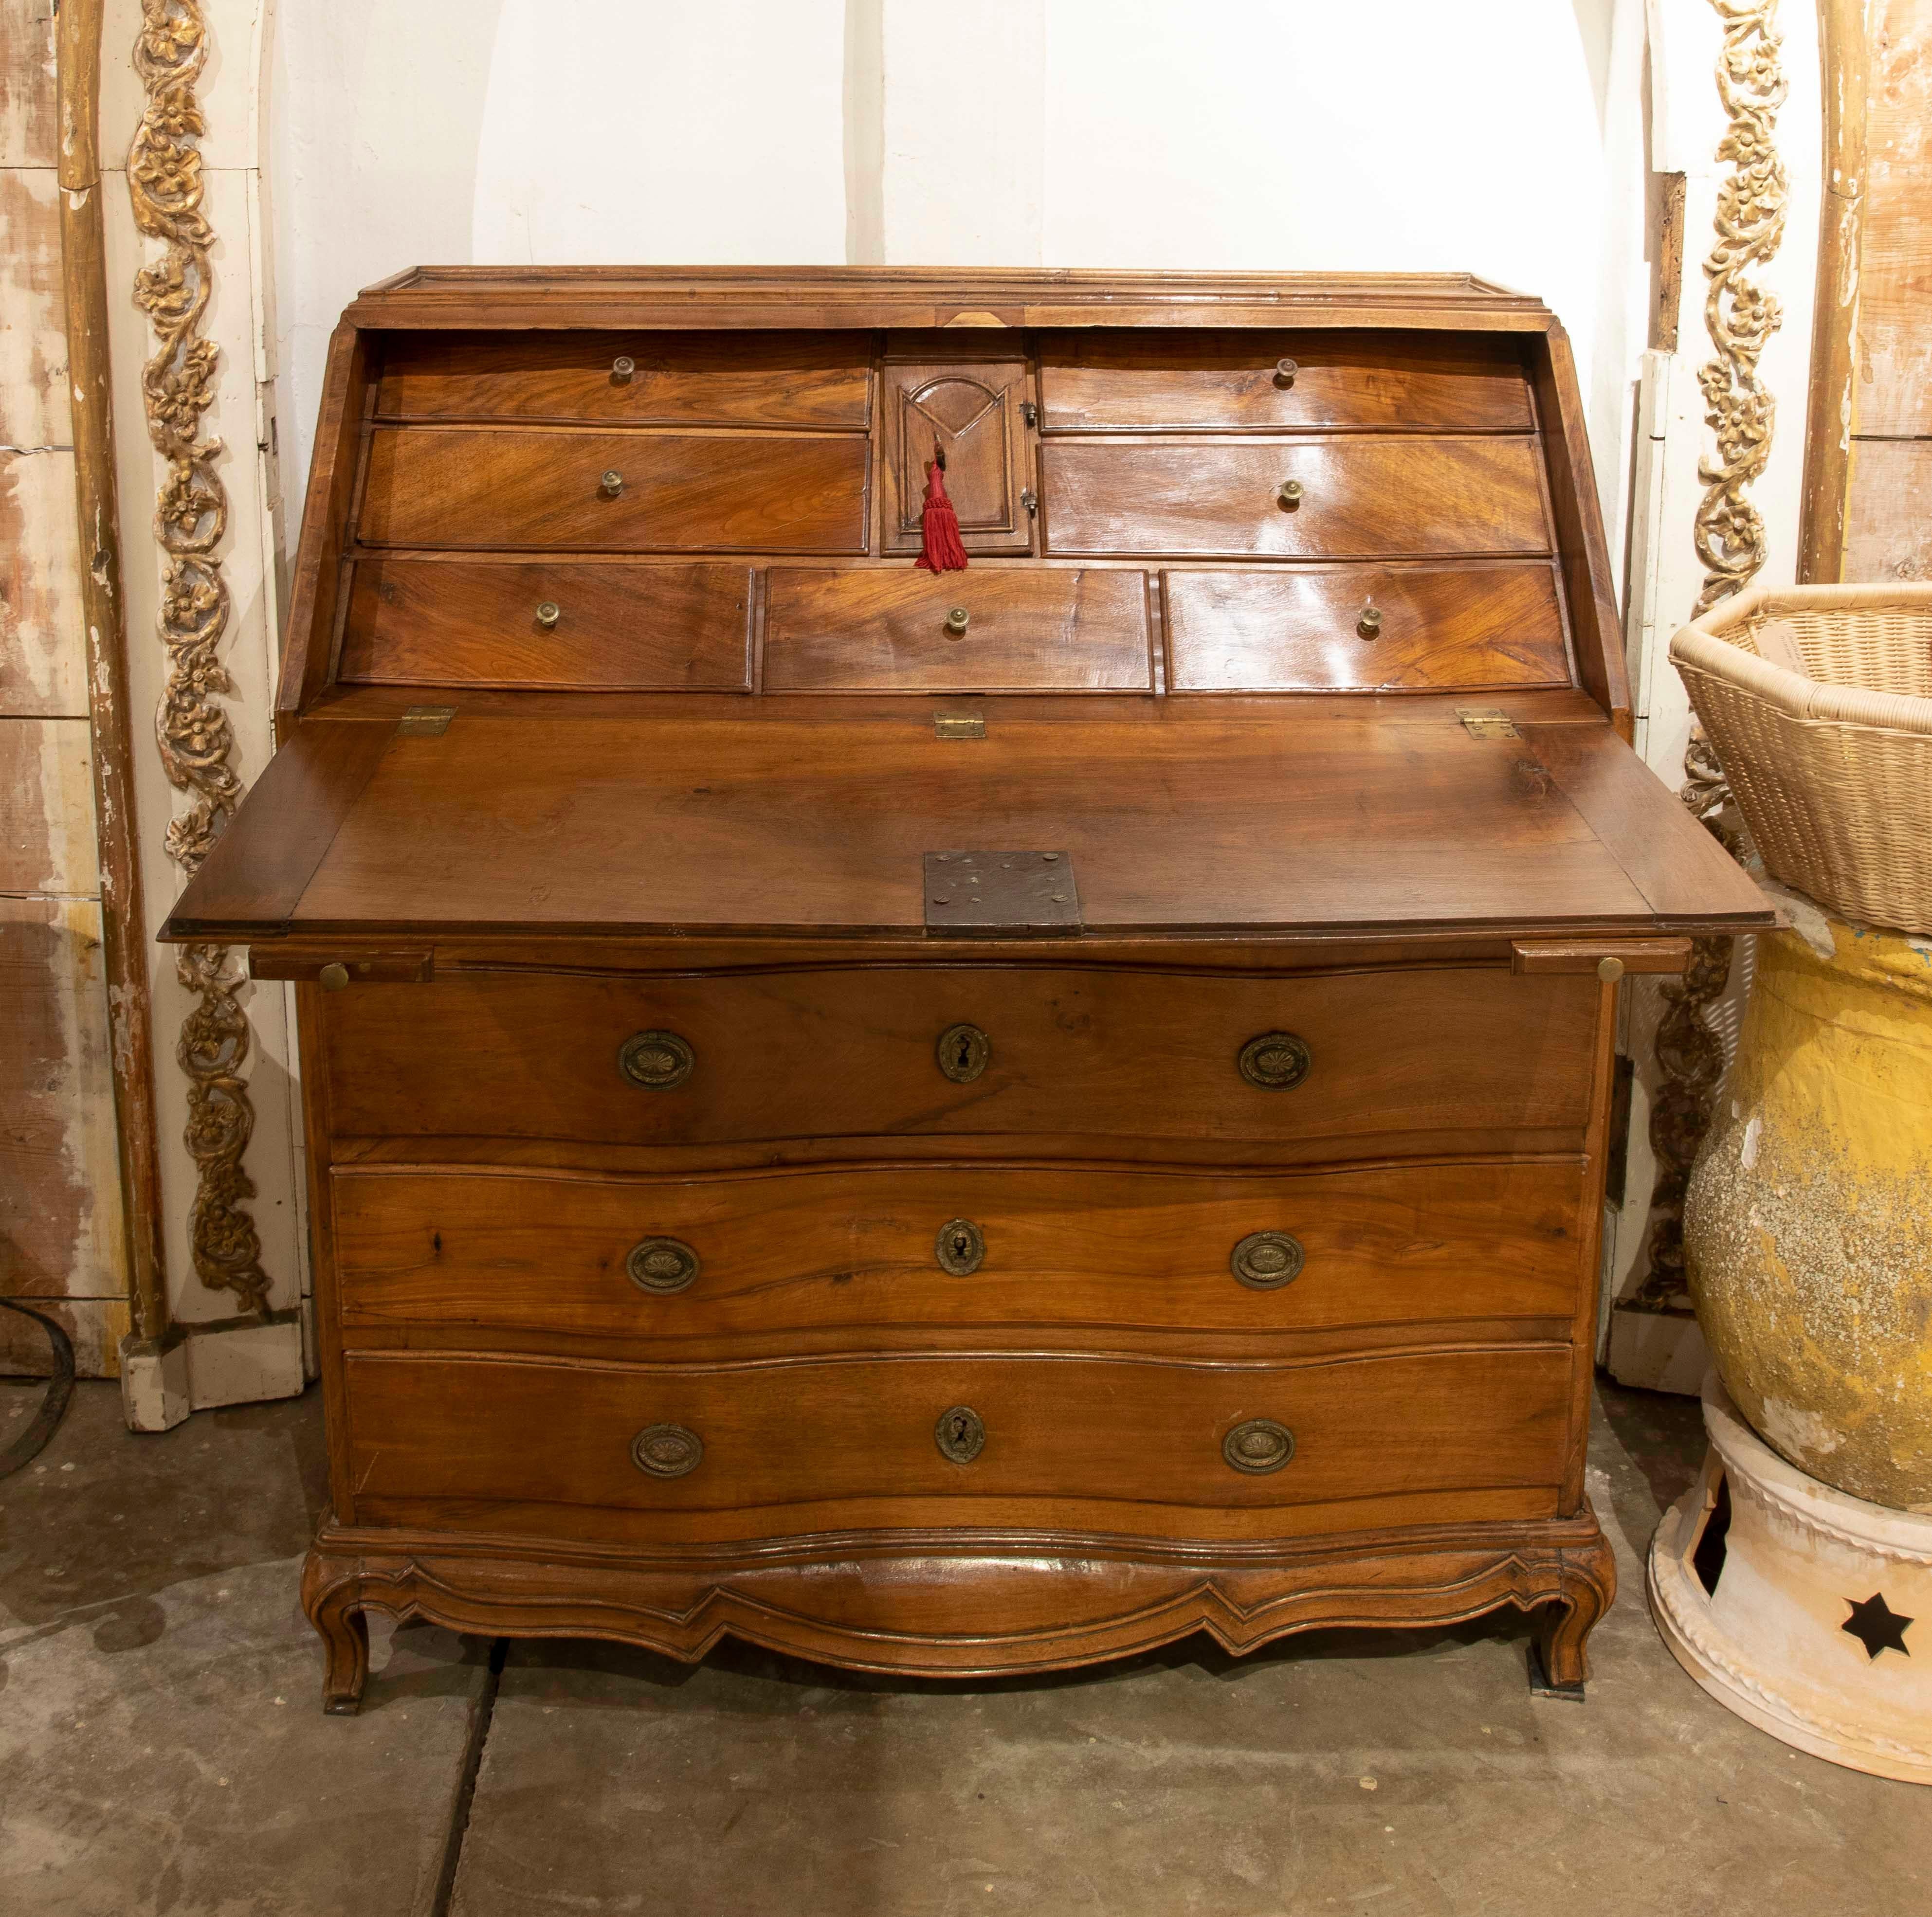 18th Century Chest of Drawers with Folding Top and Secretaire with Drawers In Good Condition For Sale In Marbella, ES